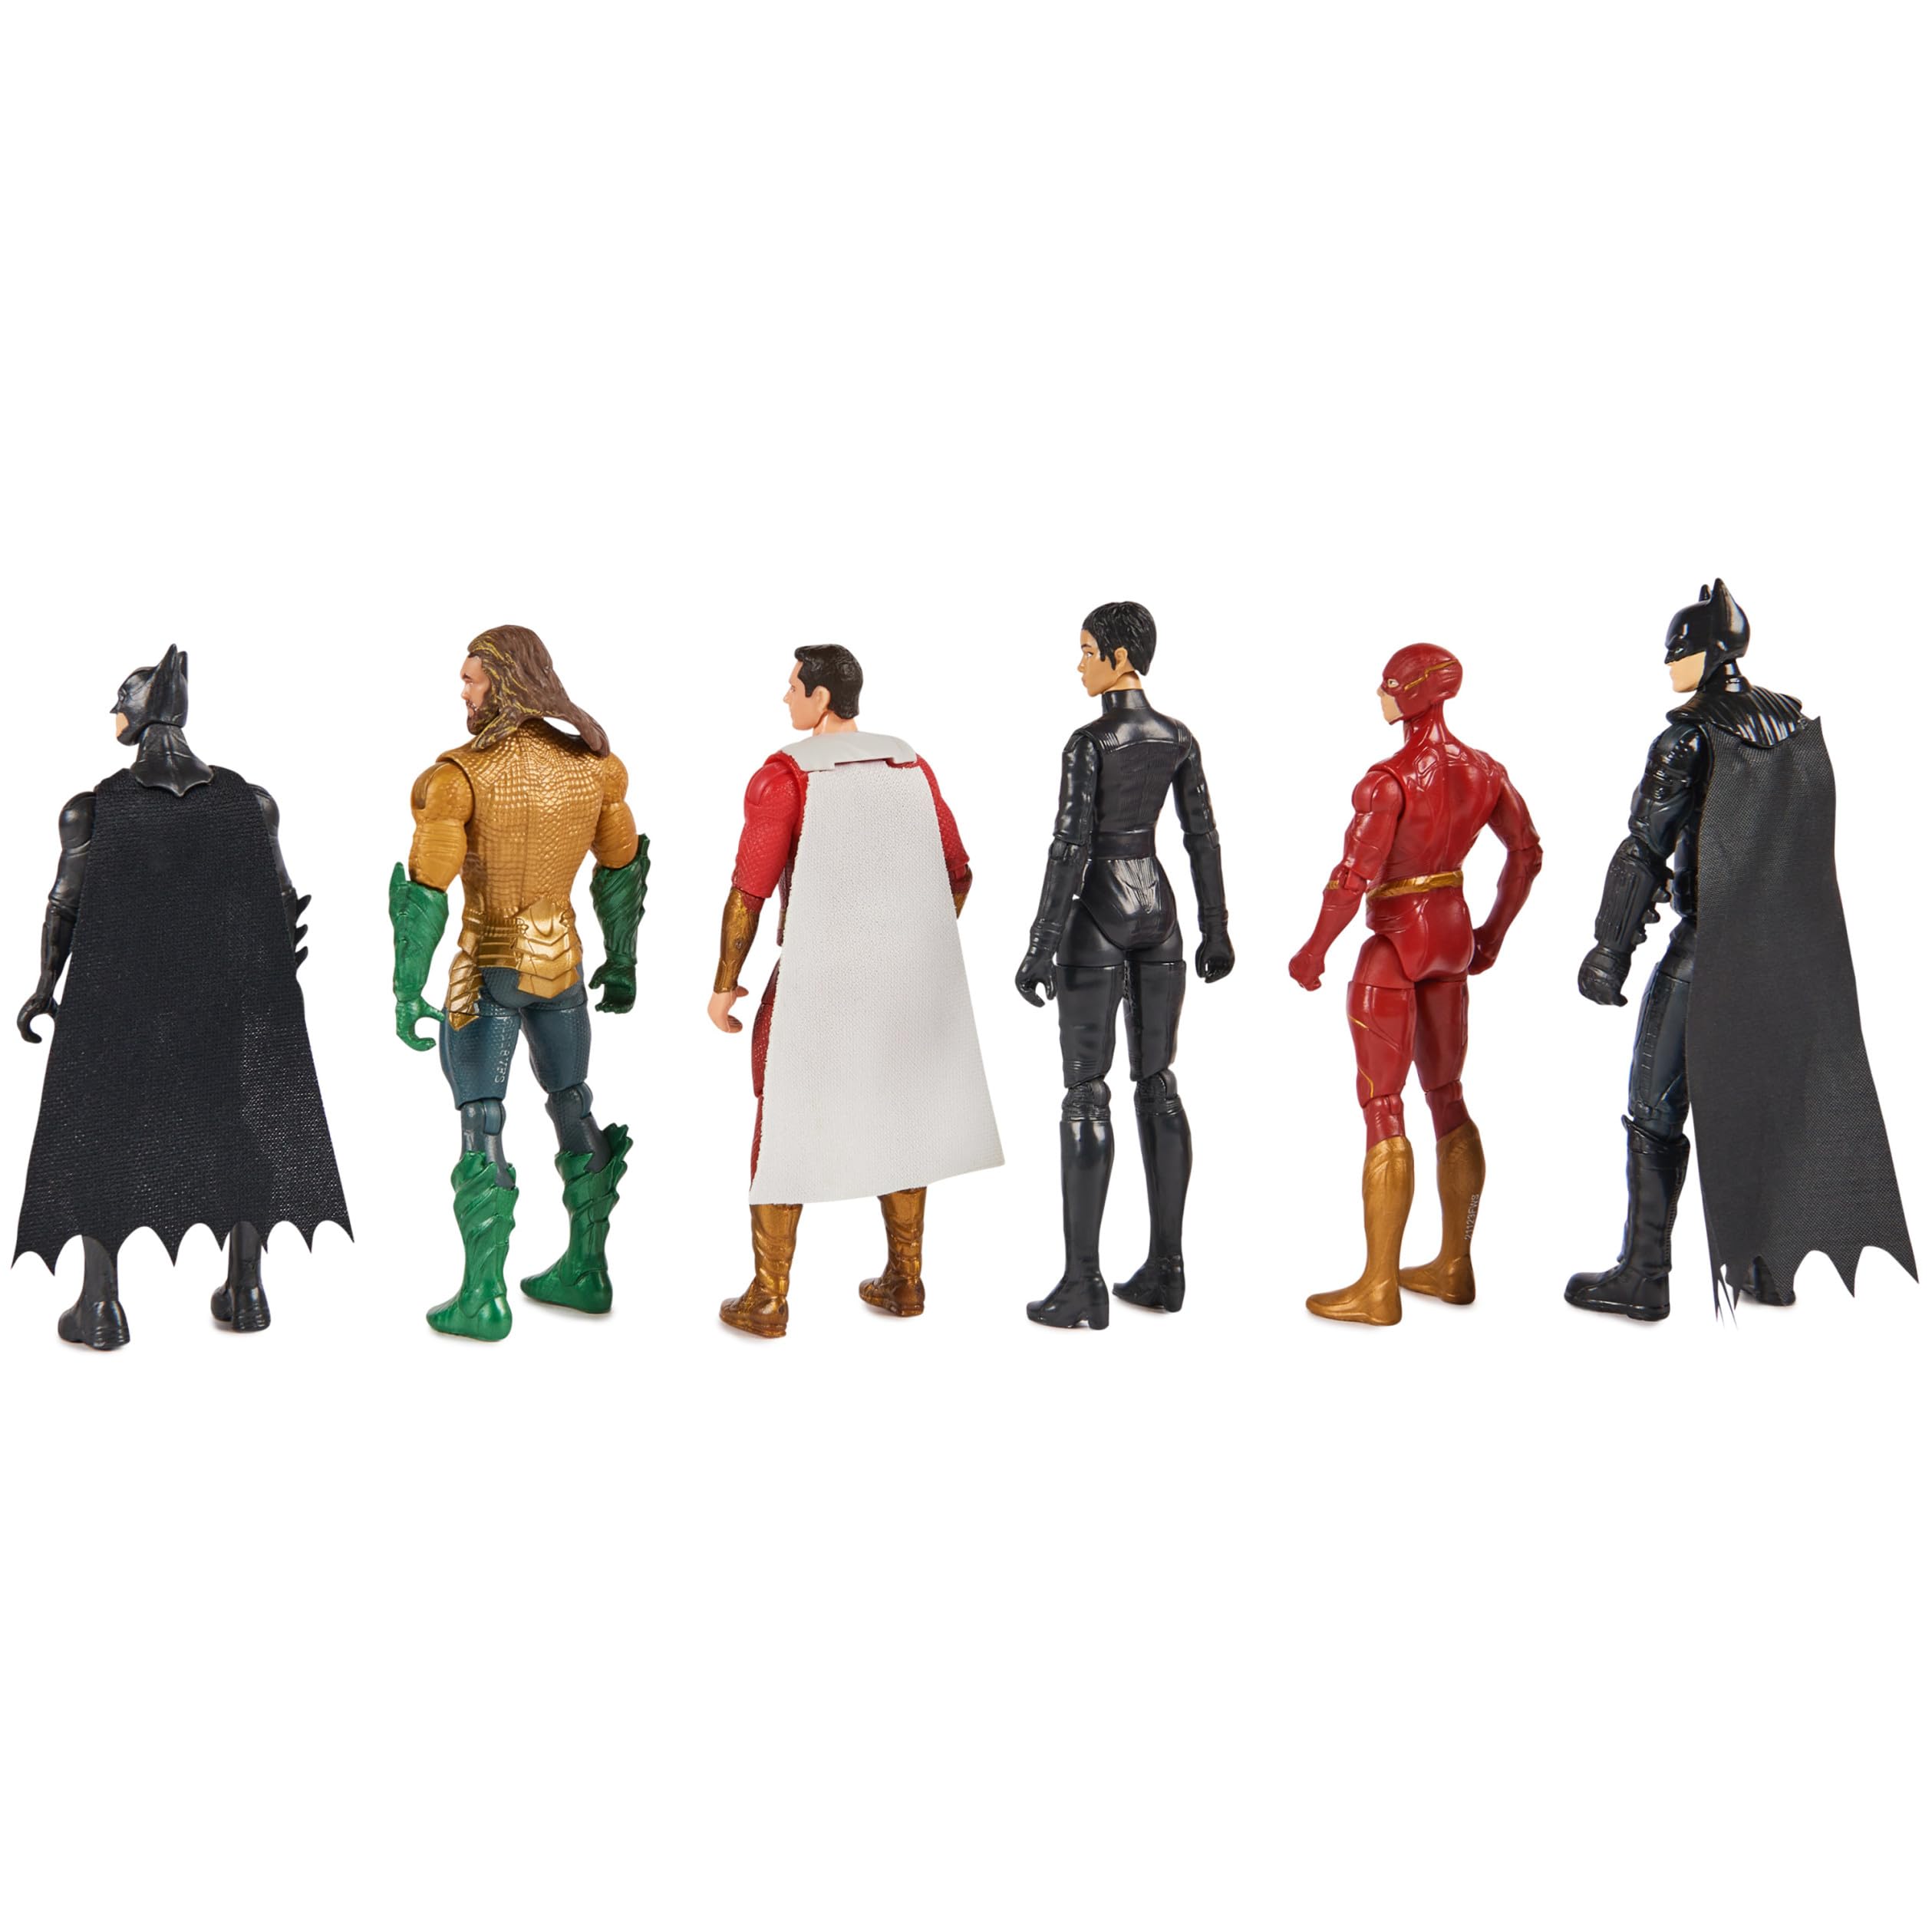 DC Comics, DC Theatrical Multi-Pack (Limited Edition), 6 Iconic Super Hero Action Figures, 4-inch Tall, WB 100 Years Anniversary Collectible, Superhero Kids Toys for Boys and Girls, Ages 3+